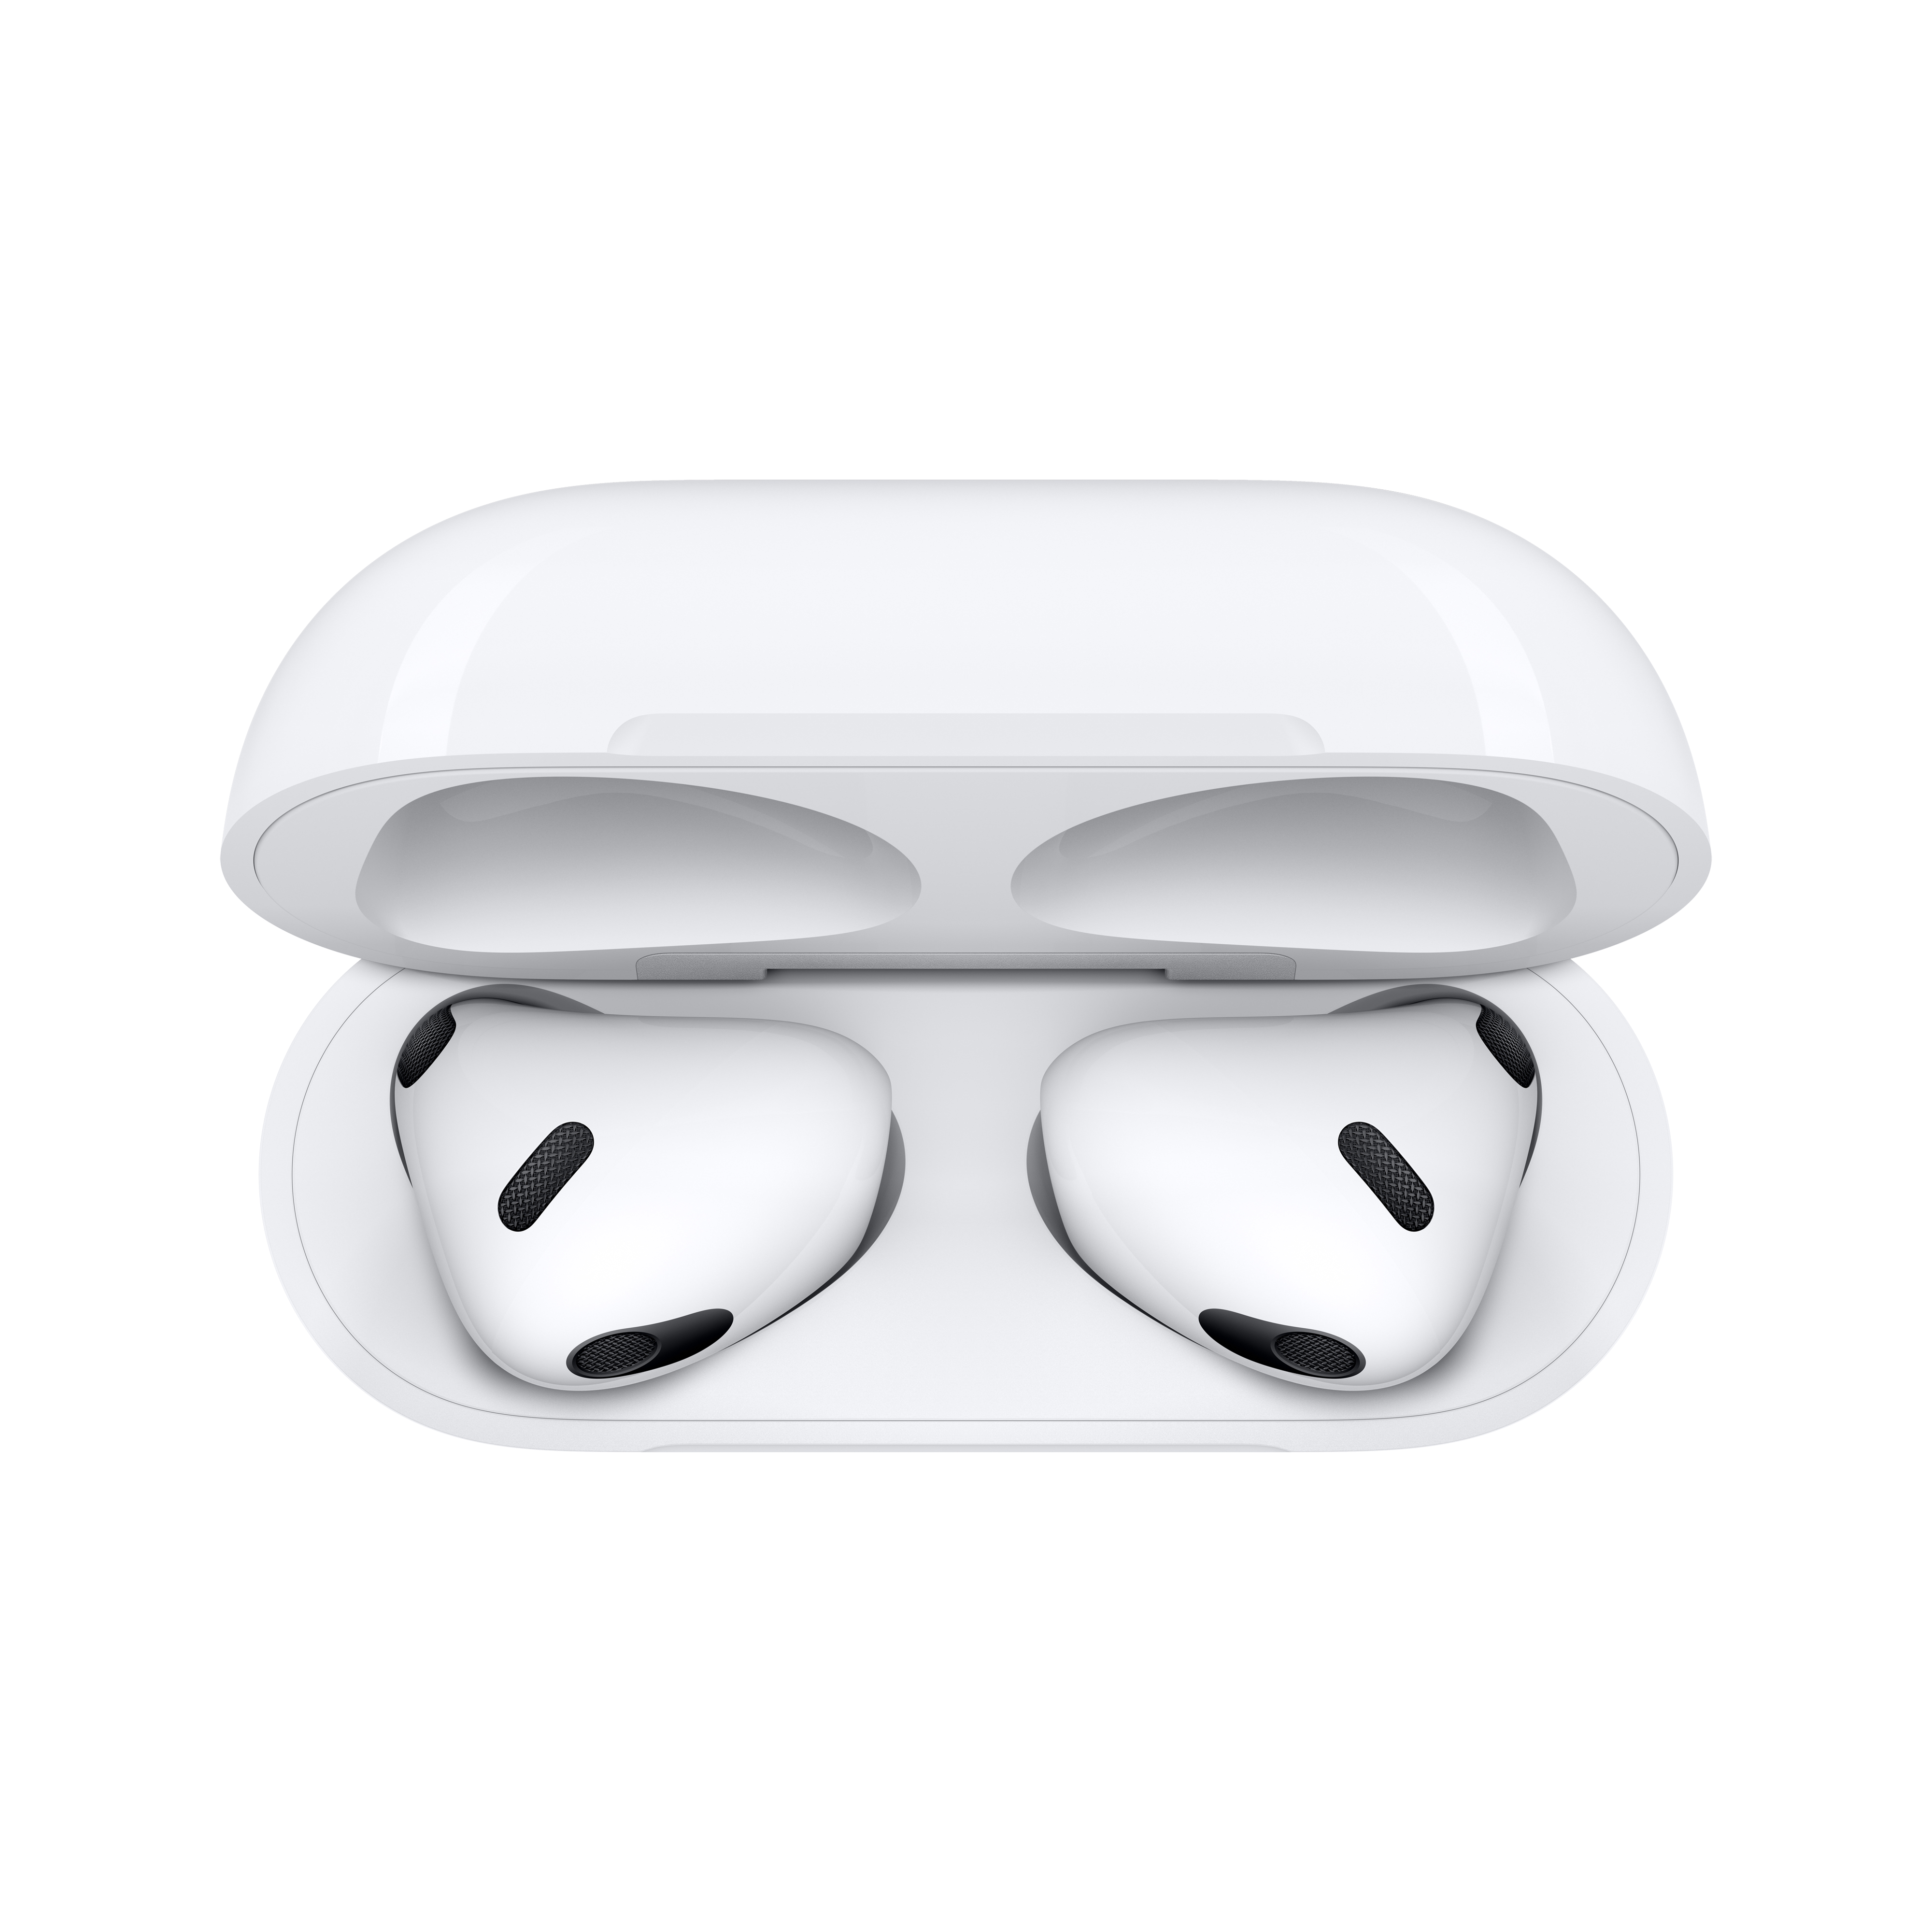 AirPods (3rd generation) with MagSafe Charging Case - image 5 of 8